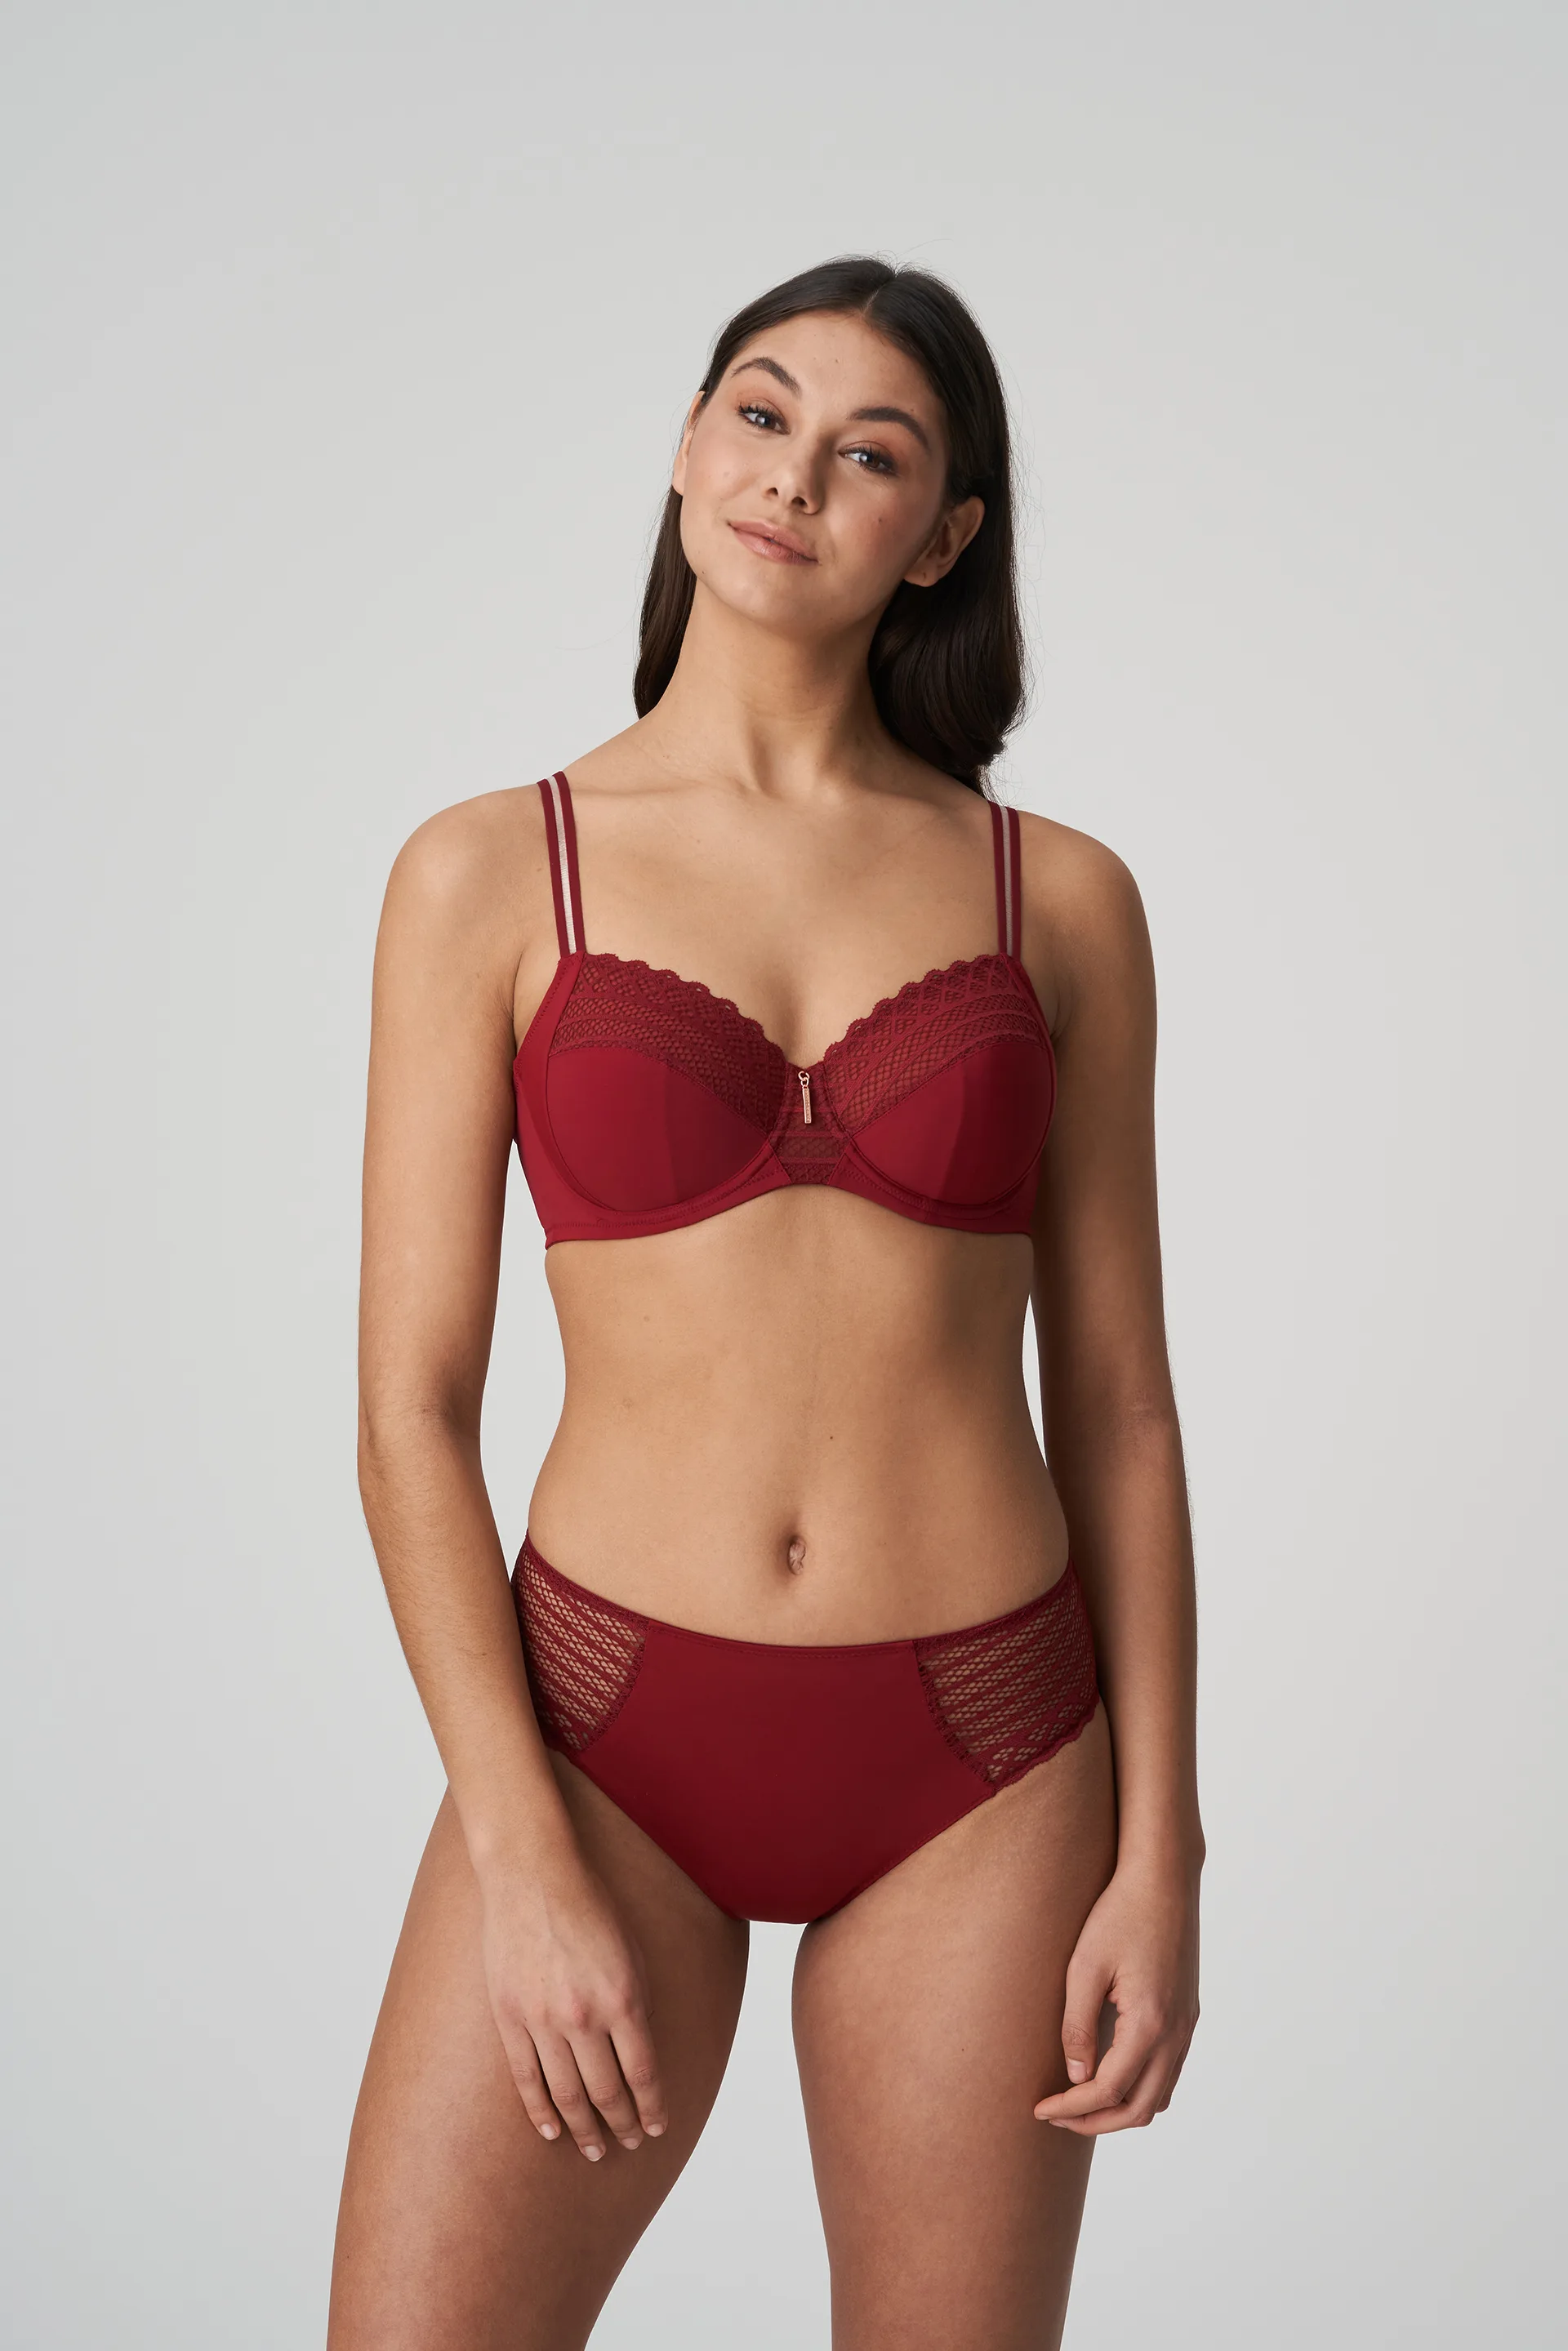 Photo of Lacy Bra on Red Silky Fabric